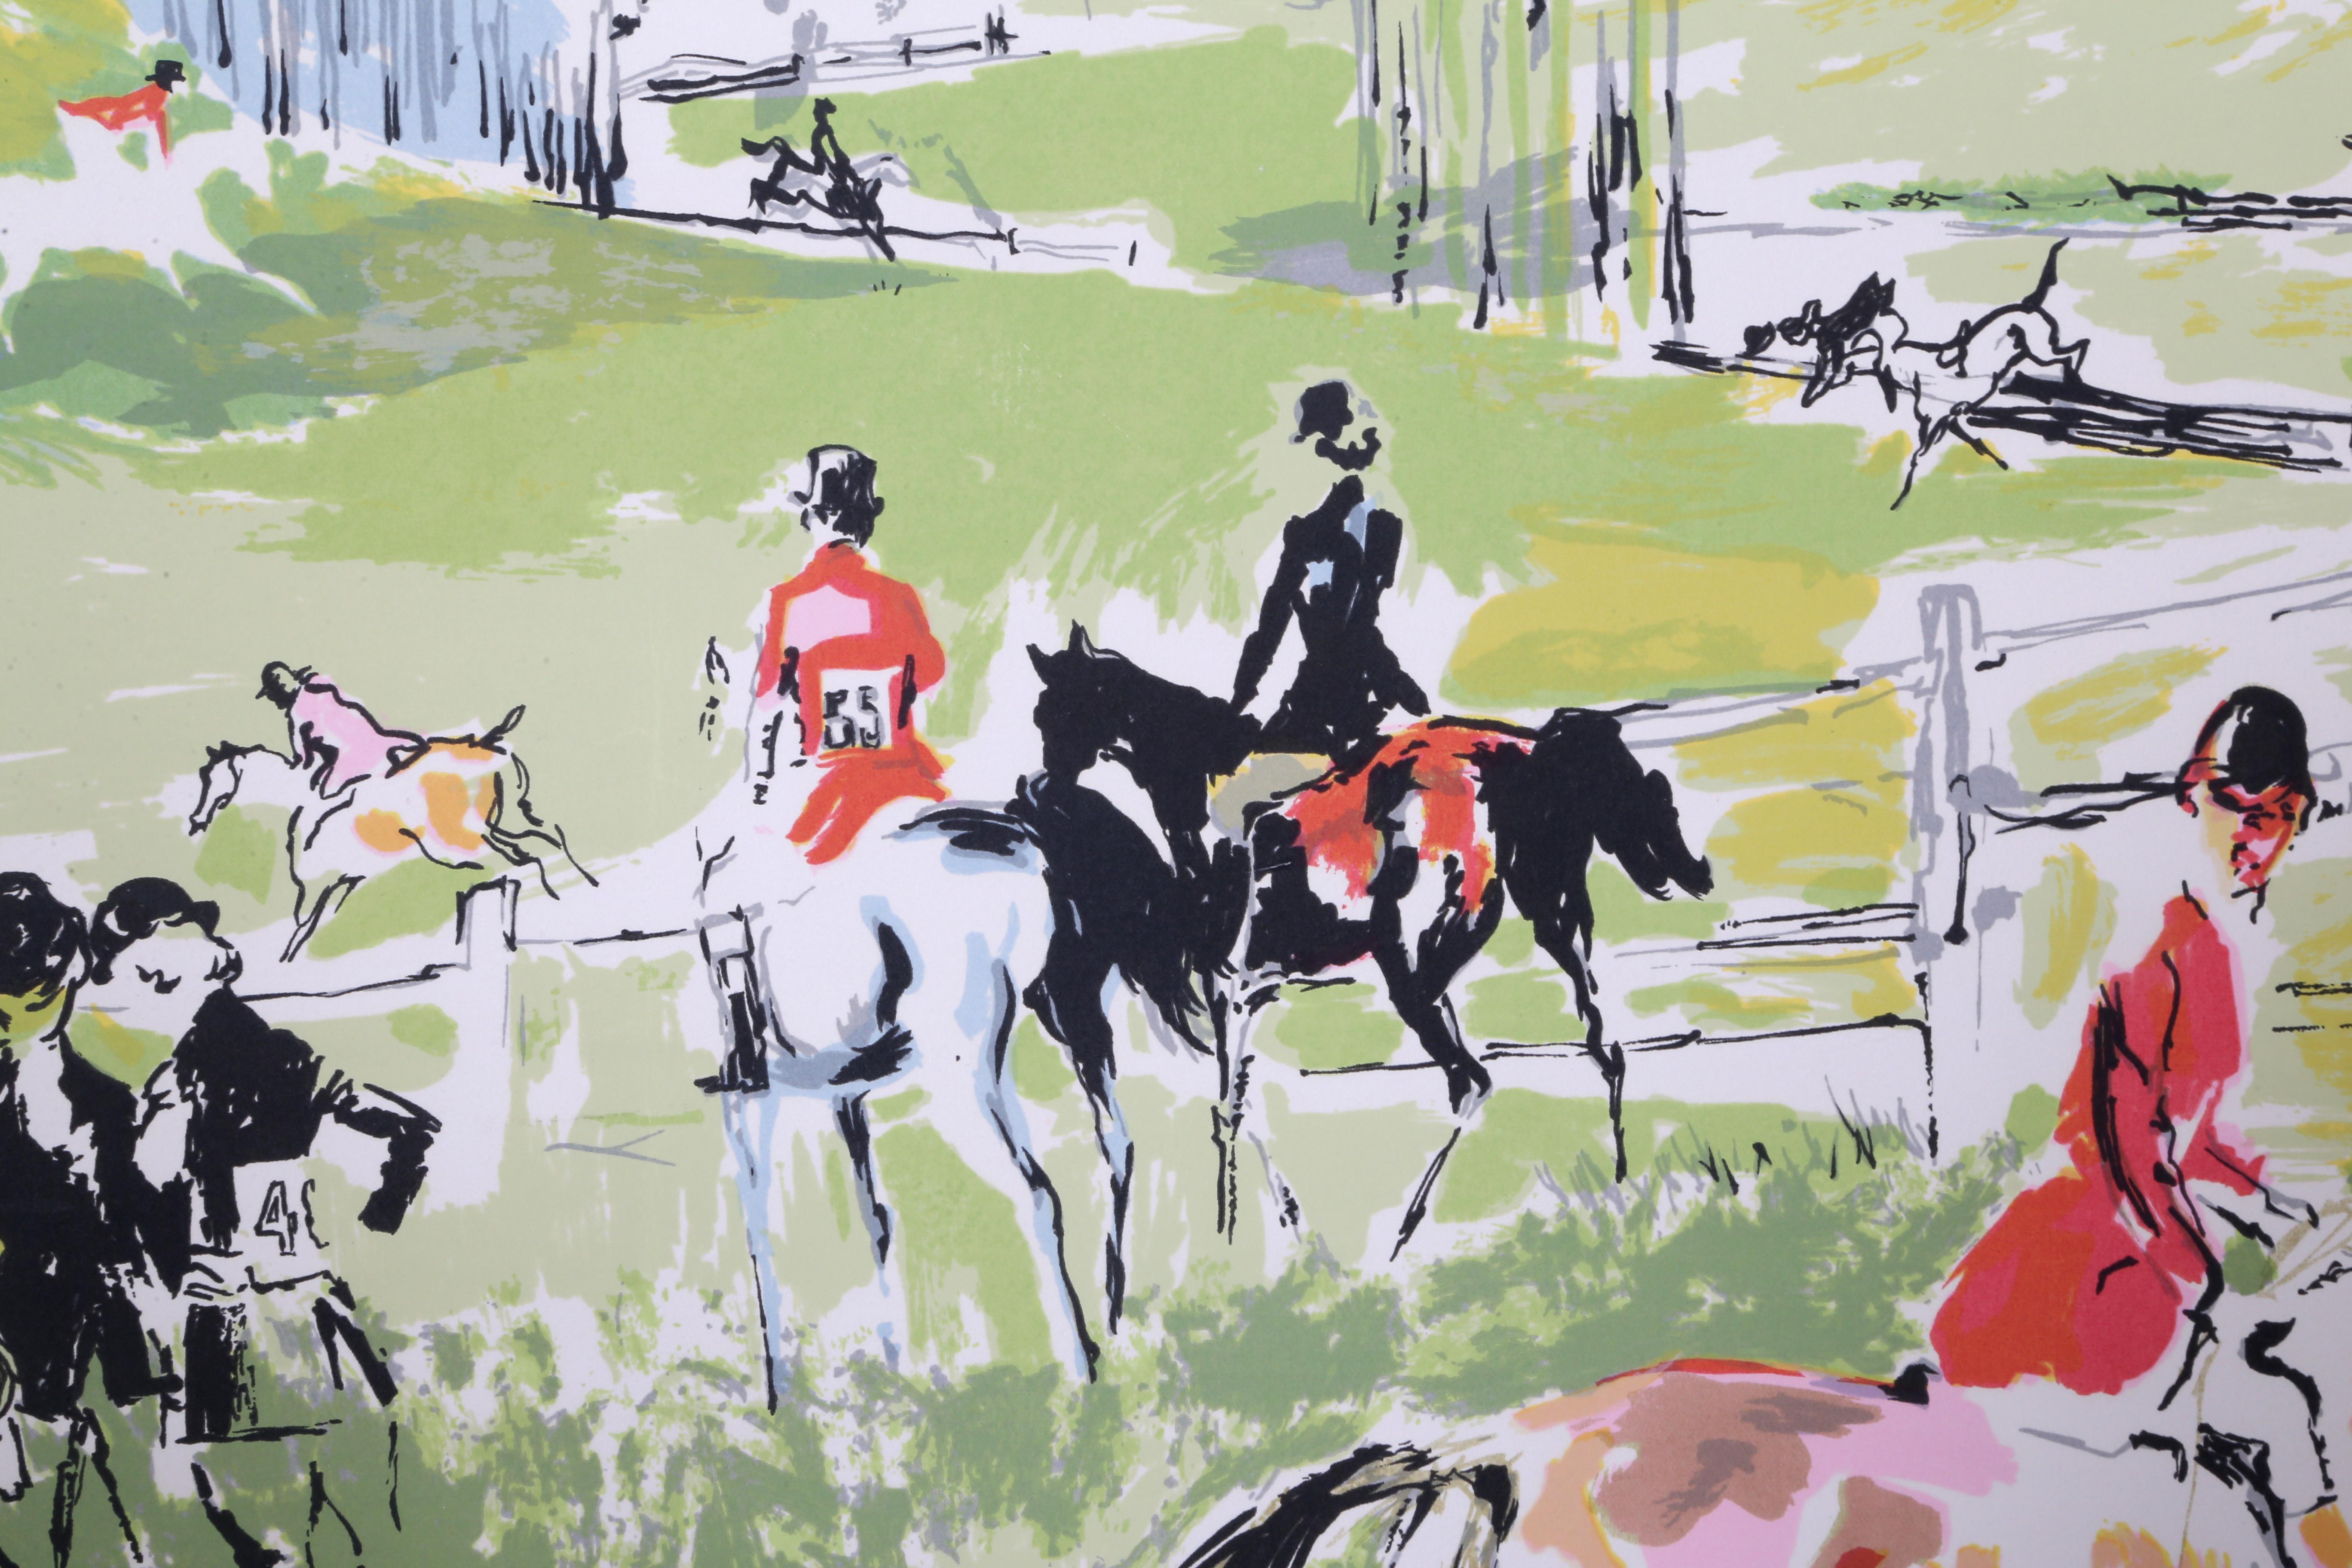 Artist: LeRoy Neiman, American (1921 - 2012)
Title:	Hunter Trials
Year: circa 1972
Medium:	Serigraph, Signed in pencil
Edition:	AP
Paper Size:	29 in. x 41 in. (73.66 cm x 104.14 cm)